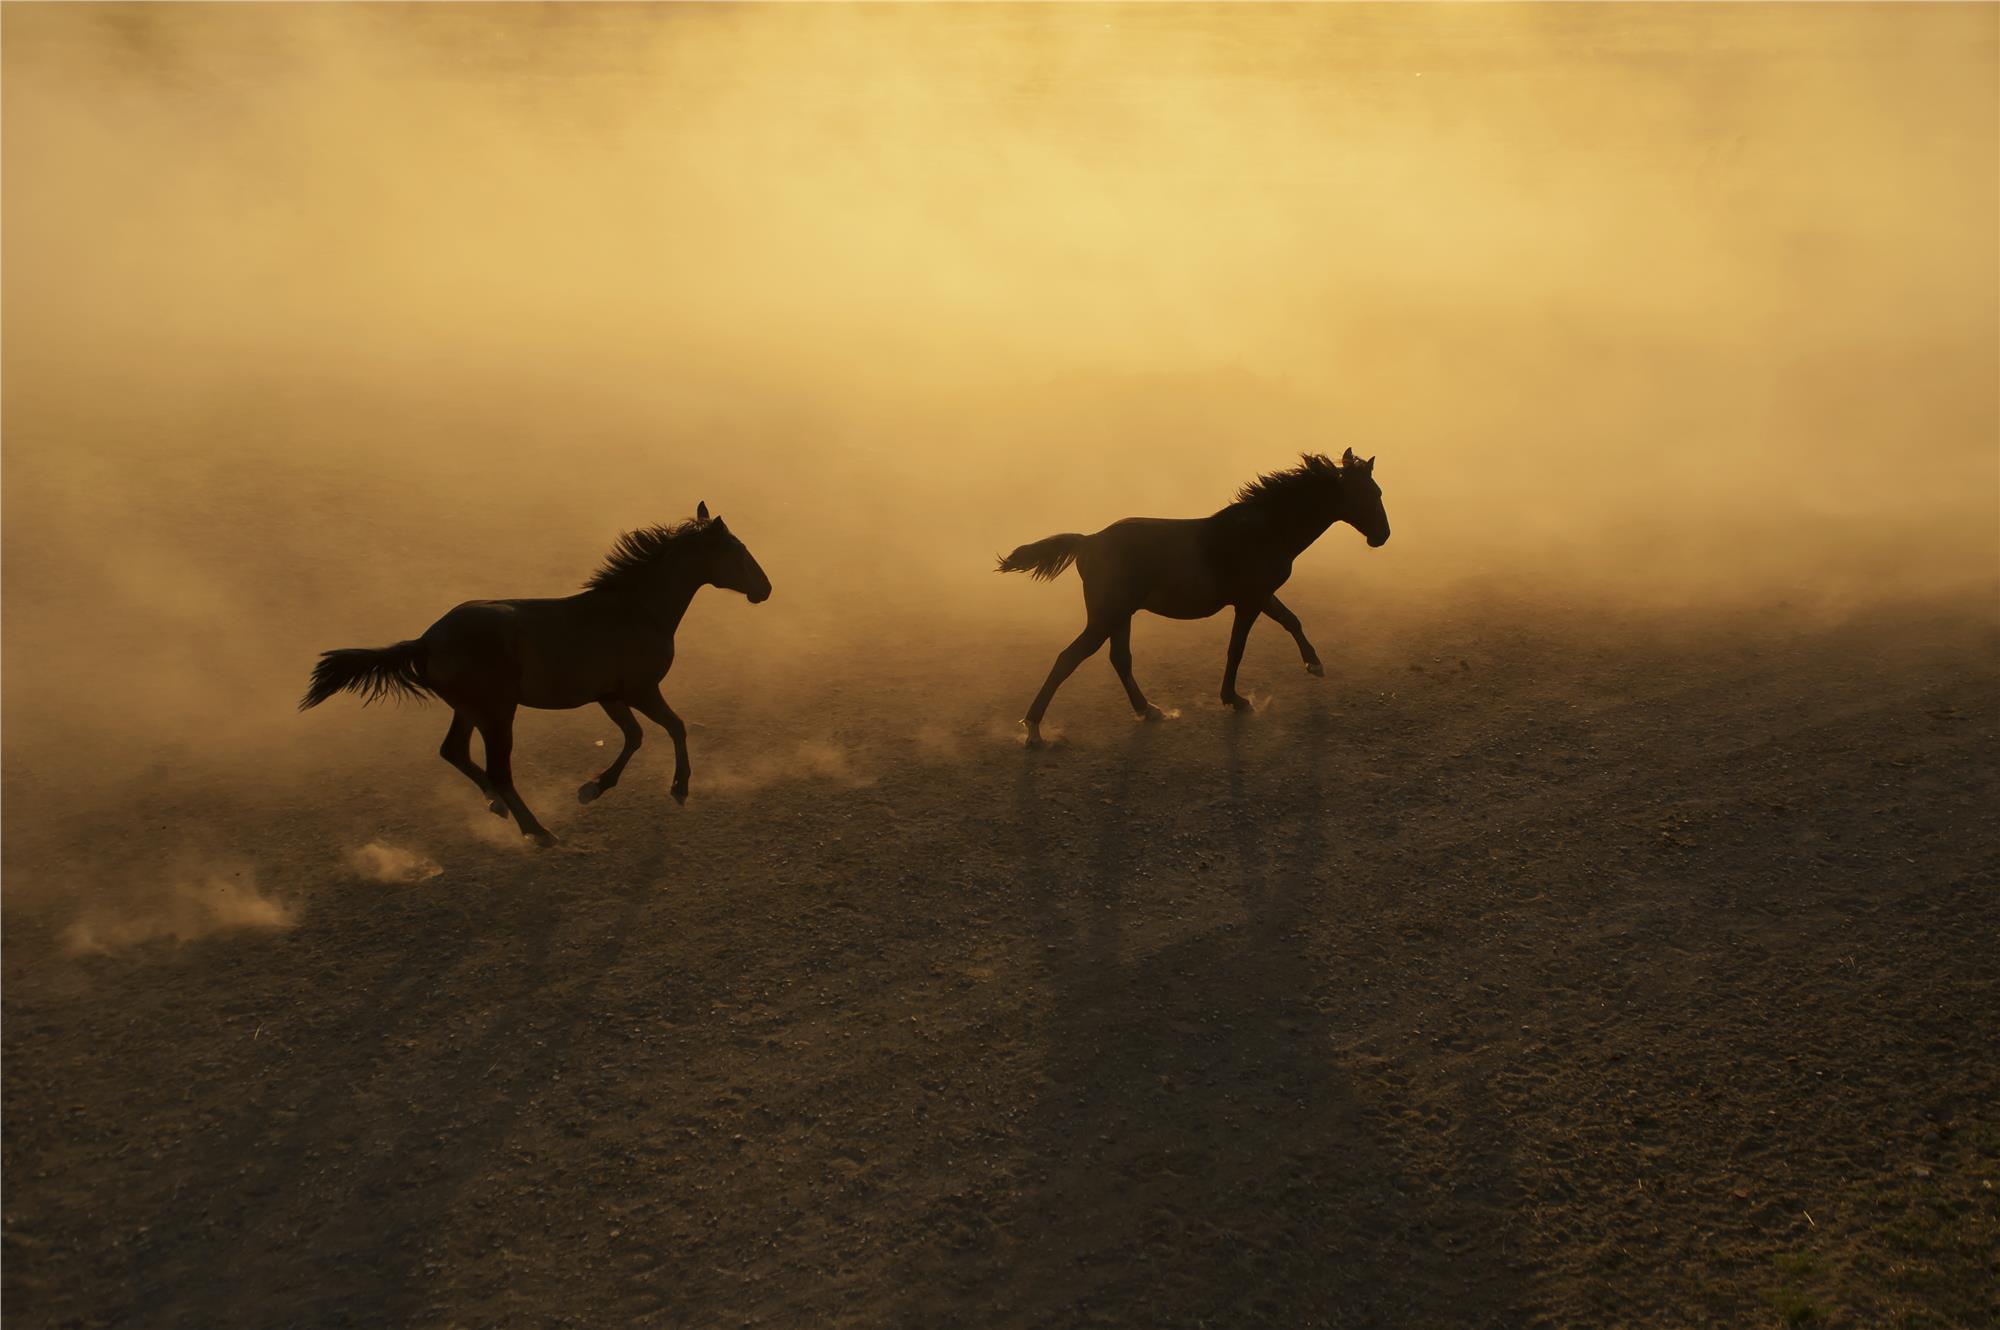 Equine Photography Workshops and Classes